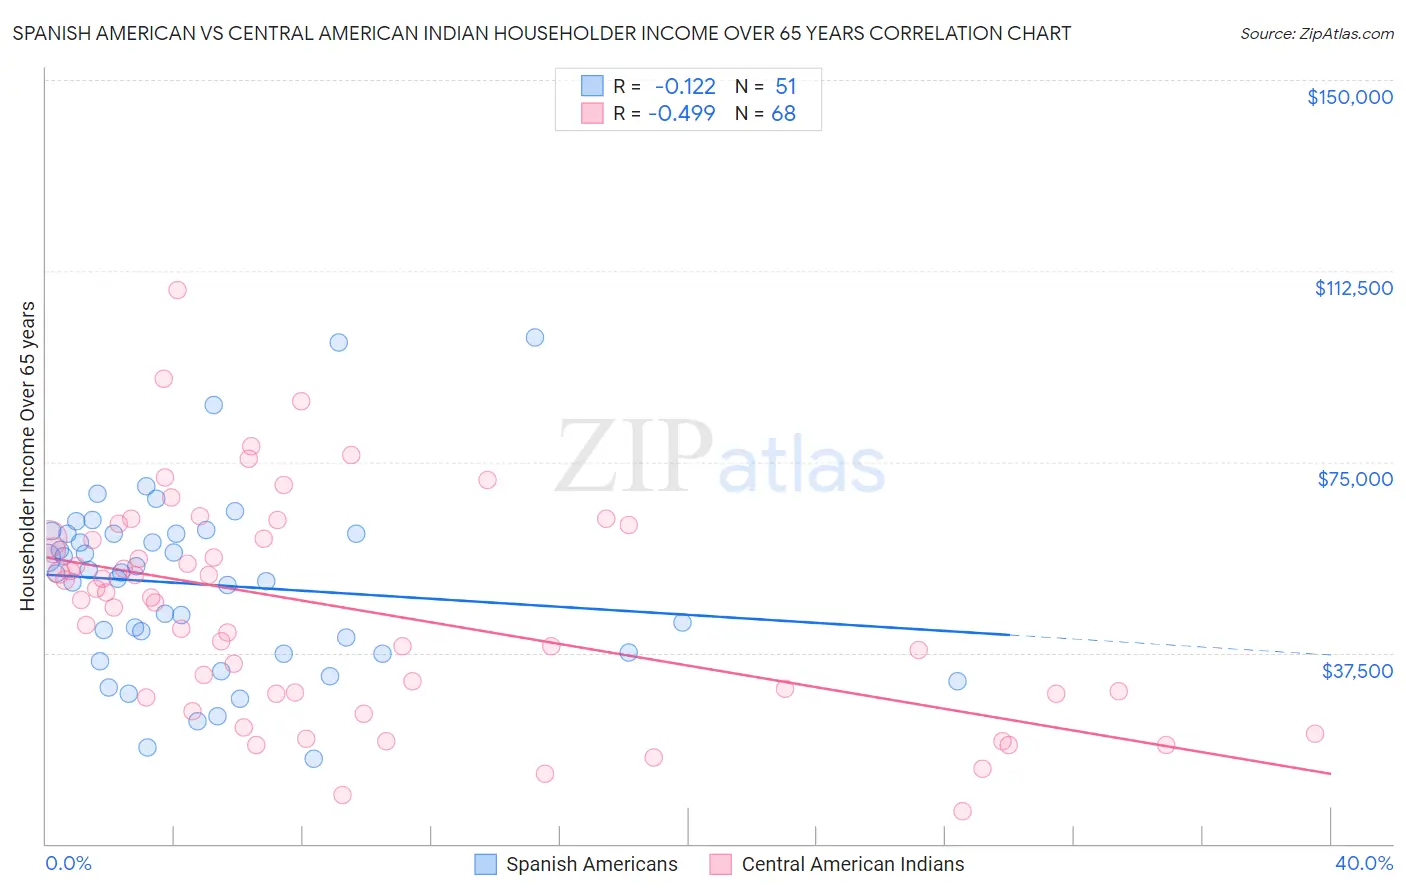 Spanish American vs Central American Indian Householder Income Over 65 years